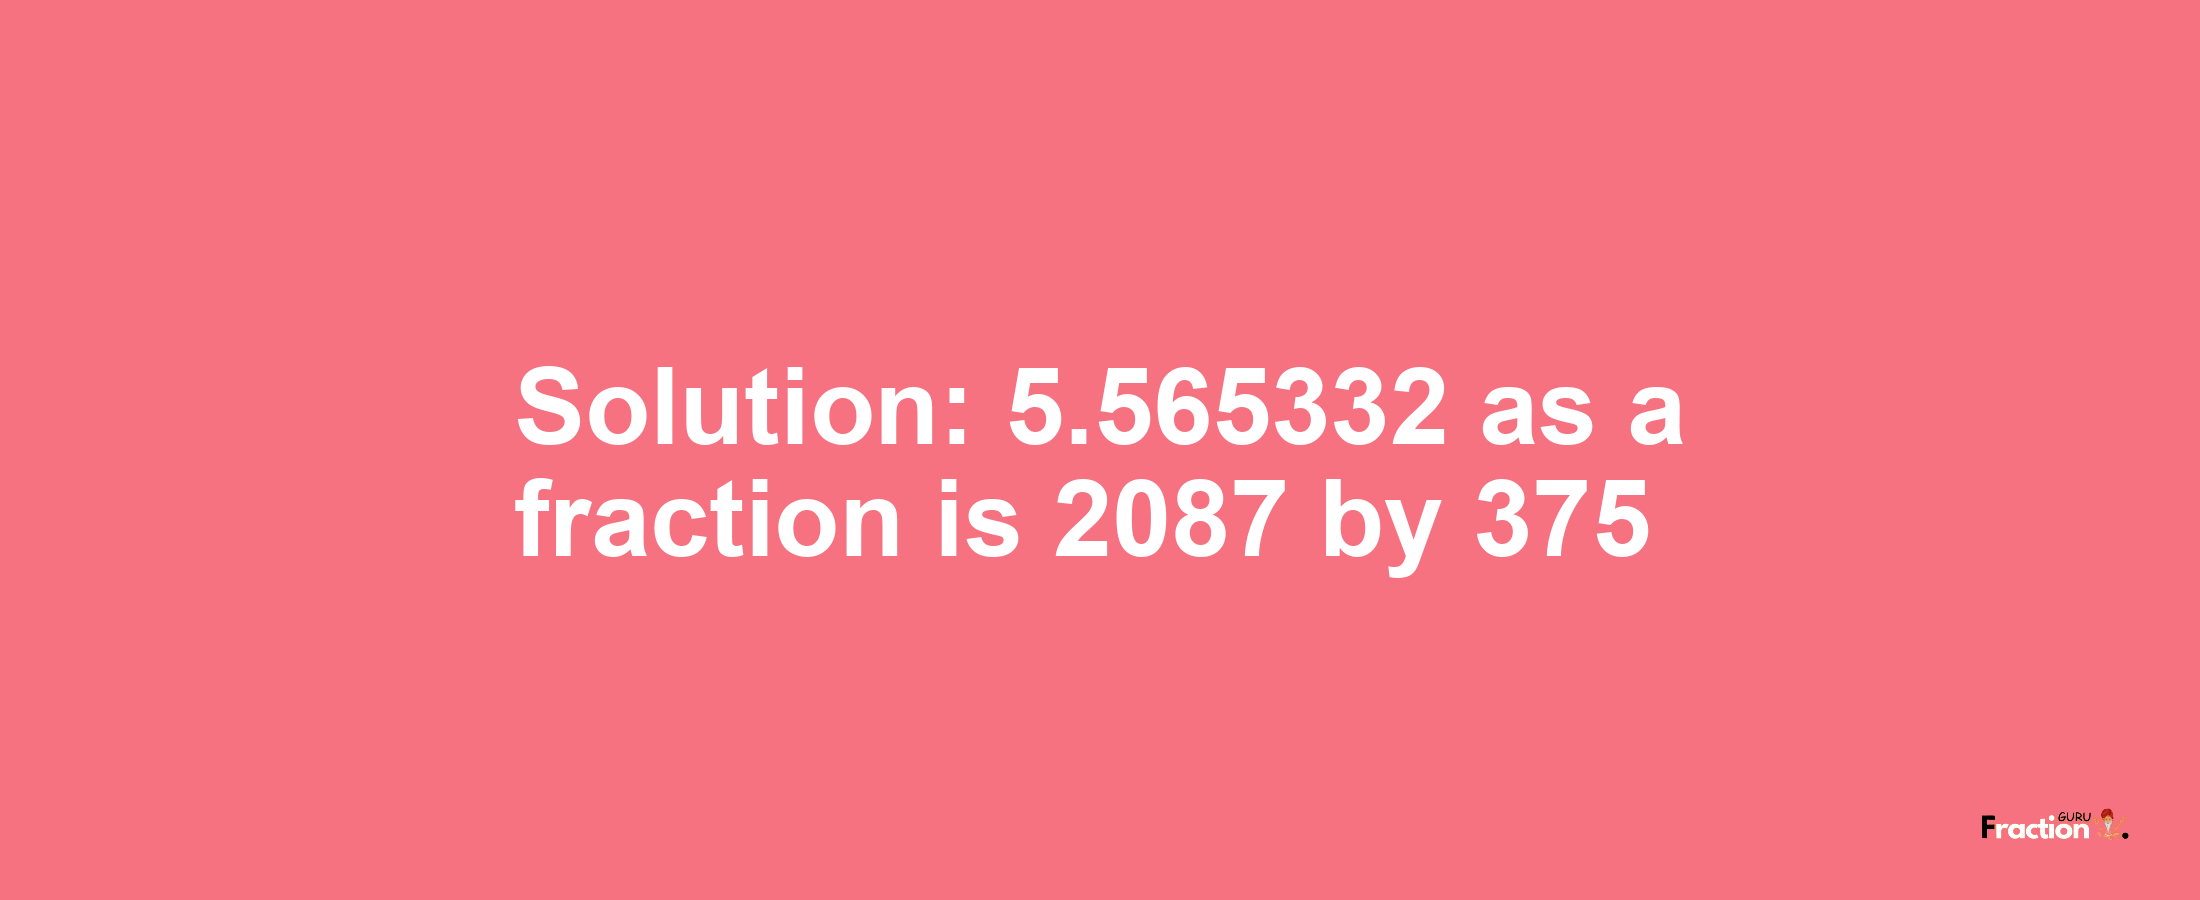 Solution:5.565332 as a fraction is 2087/375